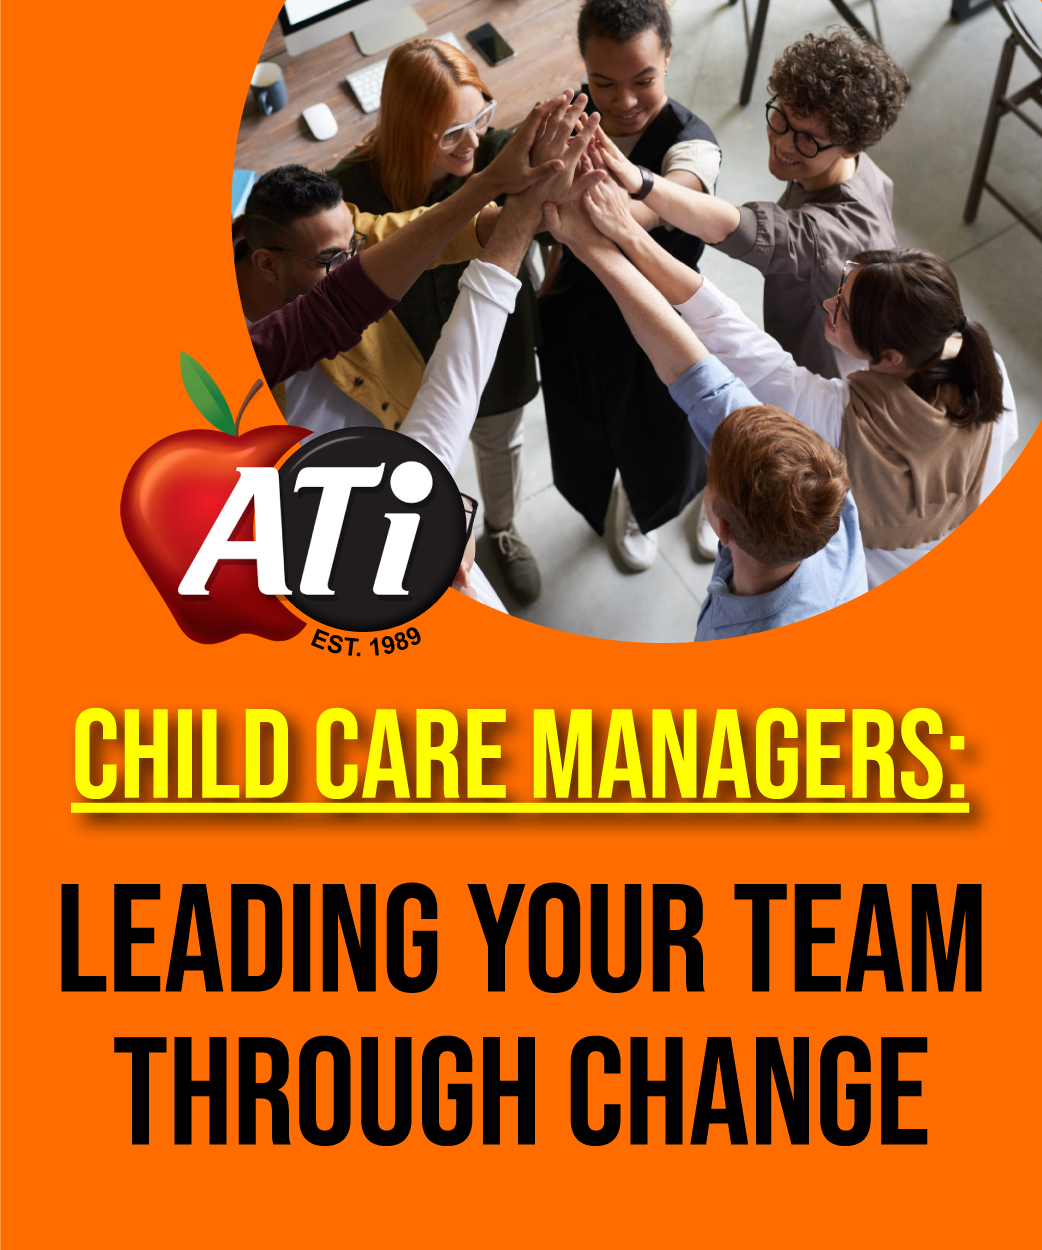 Image for Child Care Managers: Leading Your Team Through Change